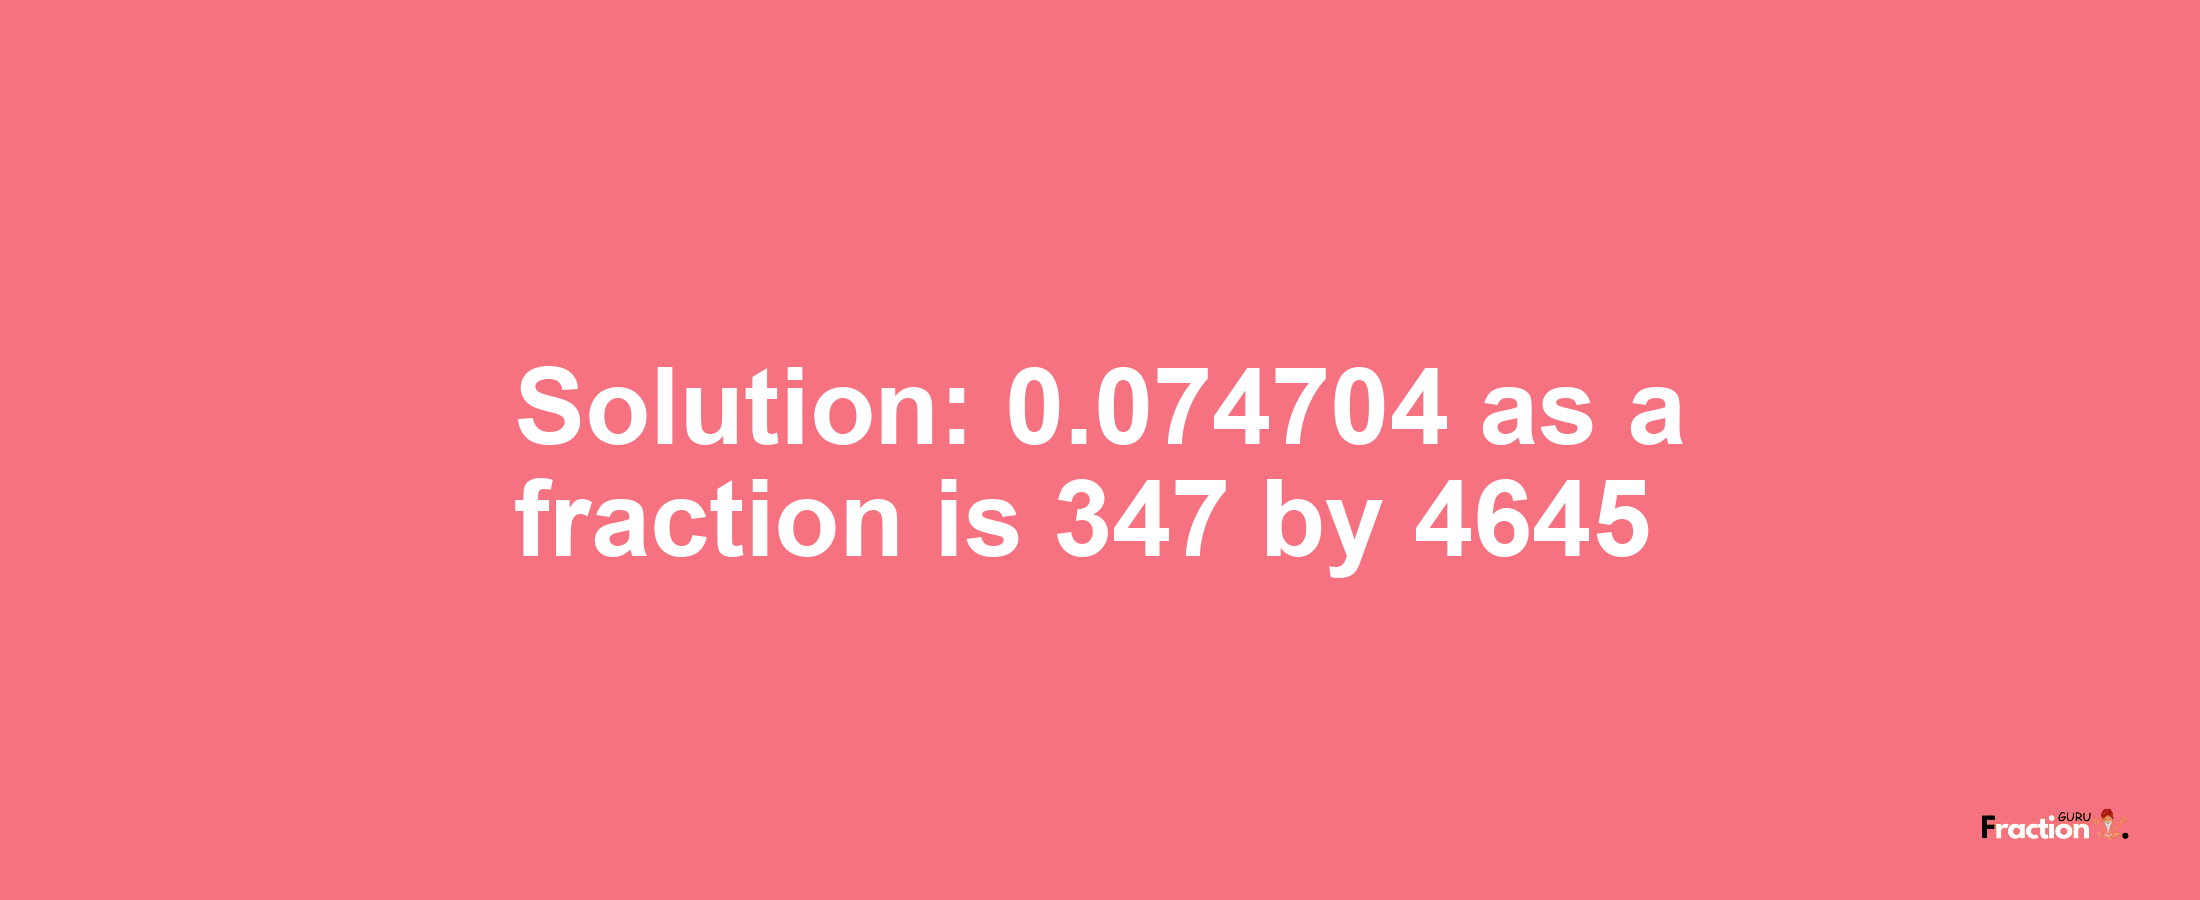 Solution:0.074704 as a fraction is 347/4645